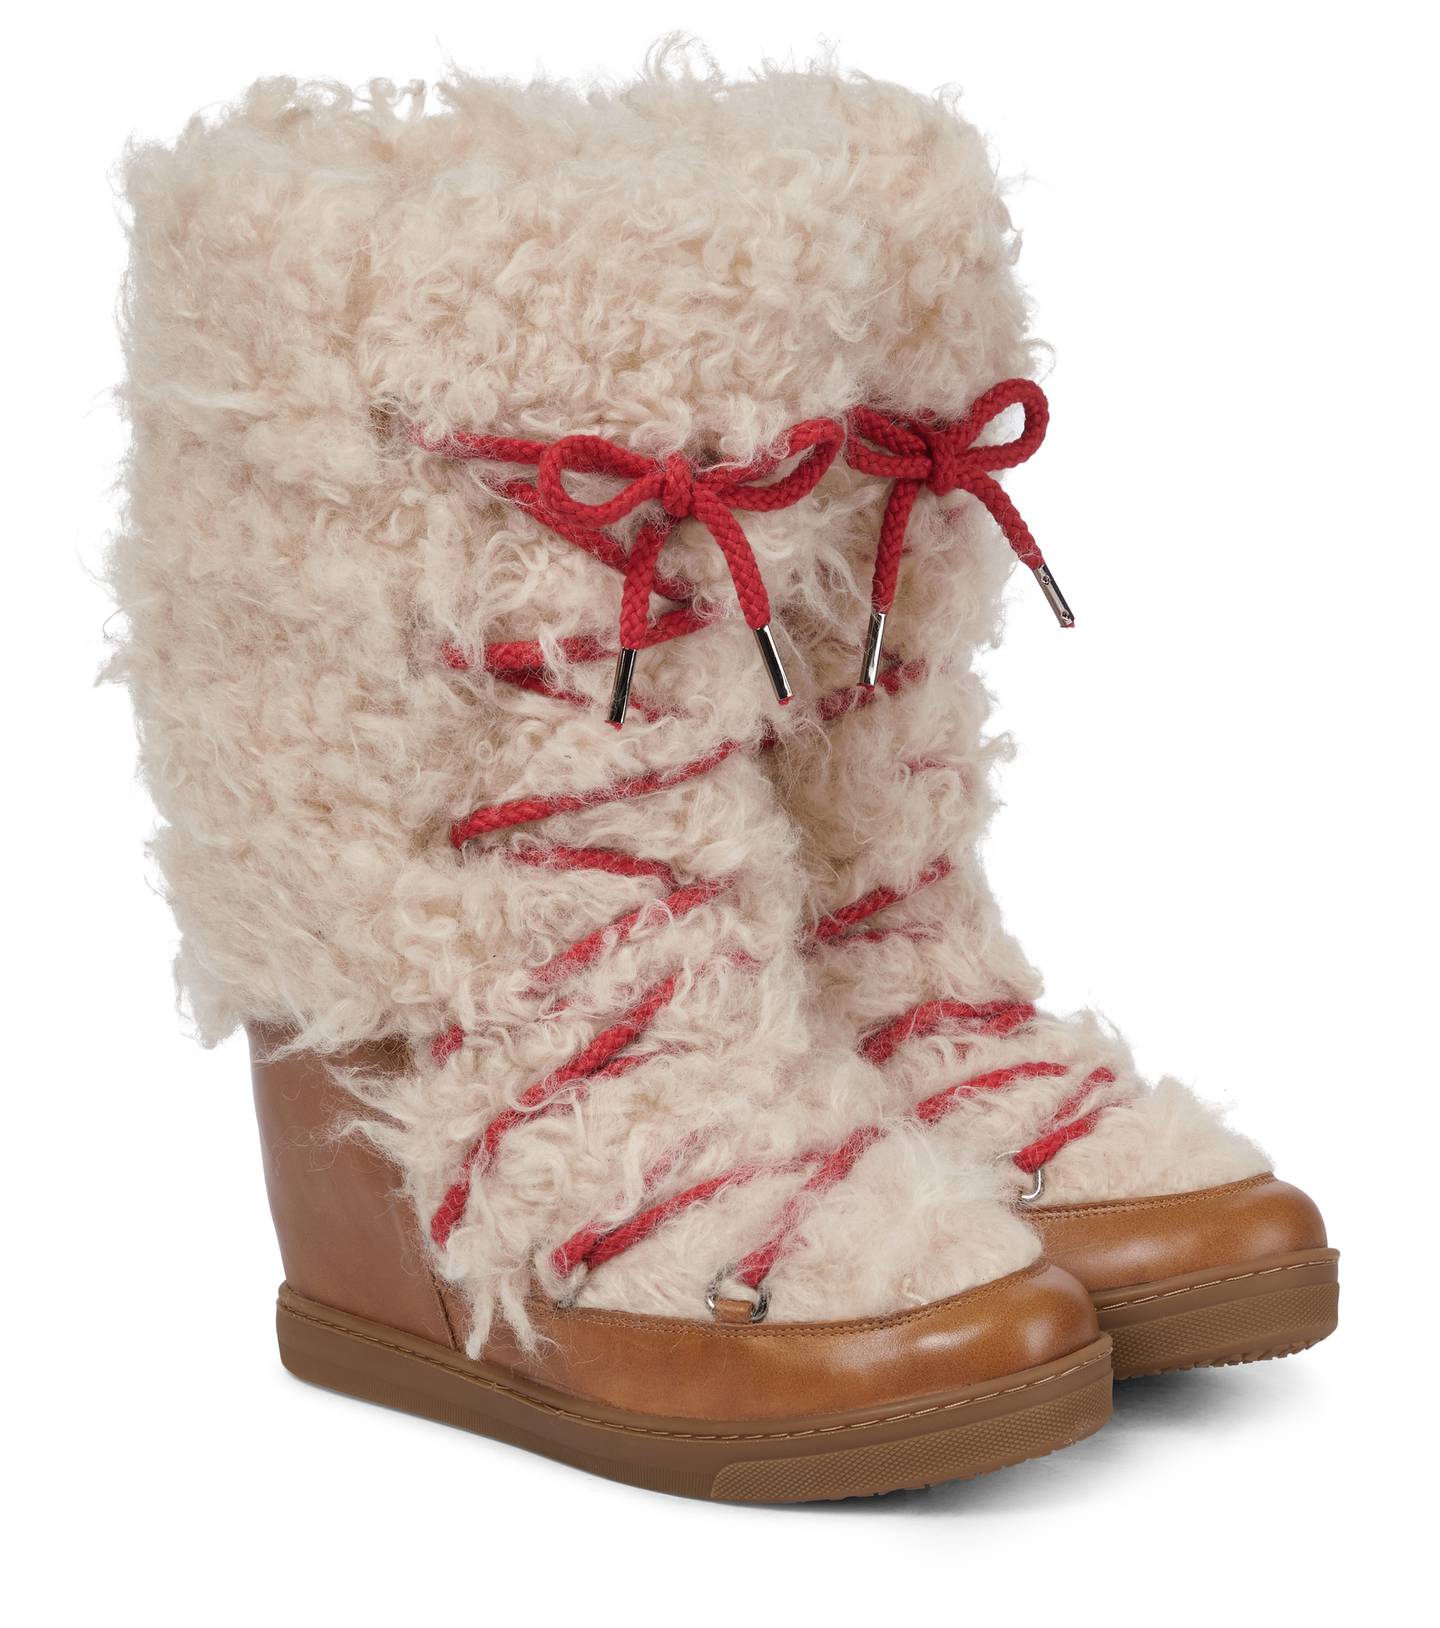 Boots from Isabel Marant's Snow Capsule collection